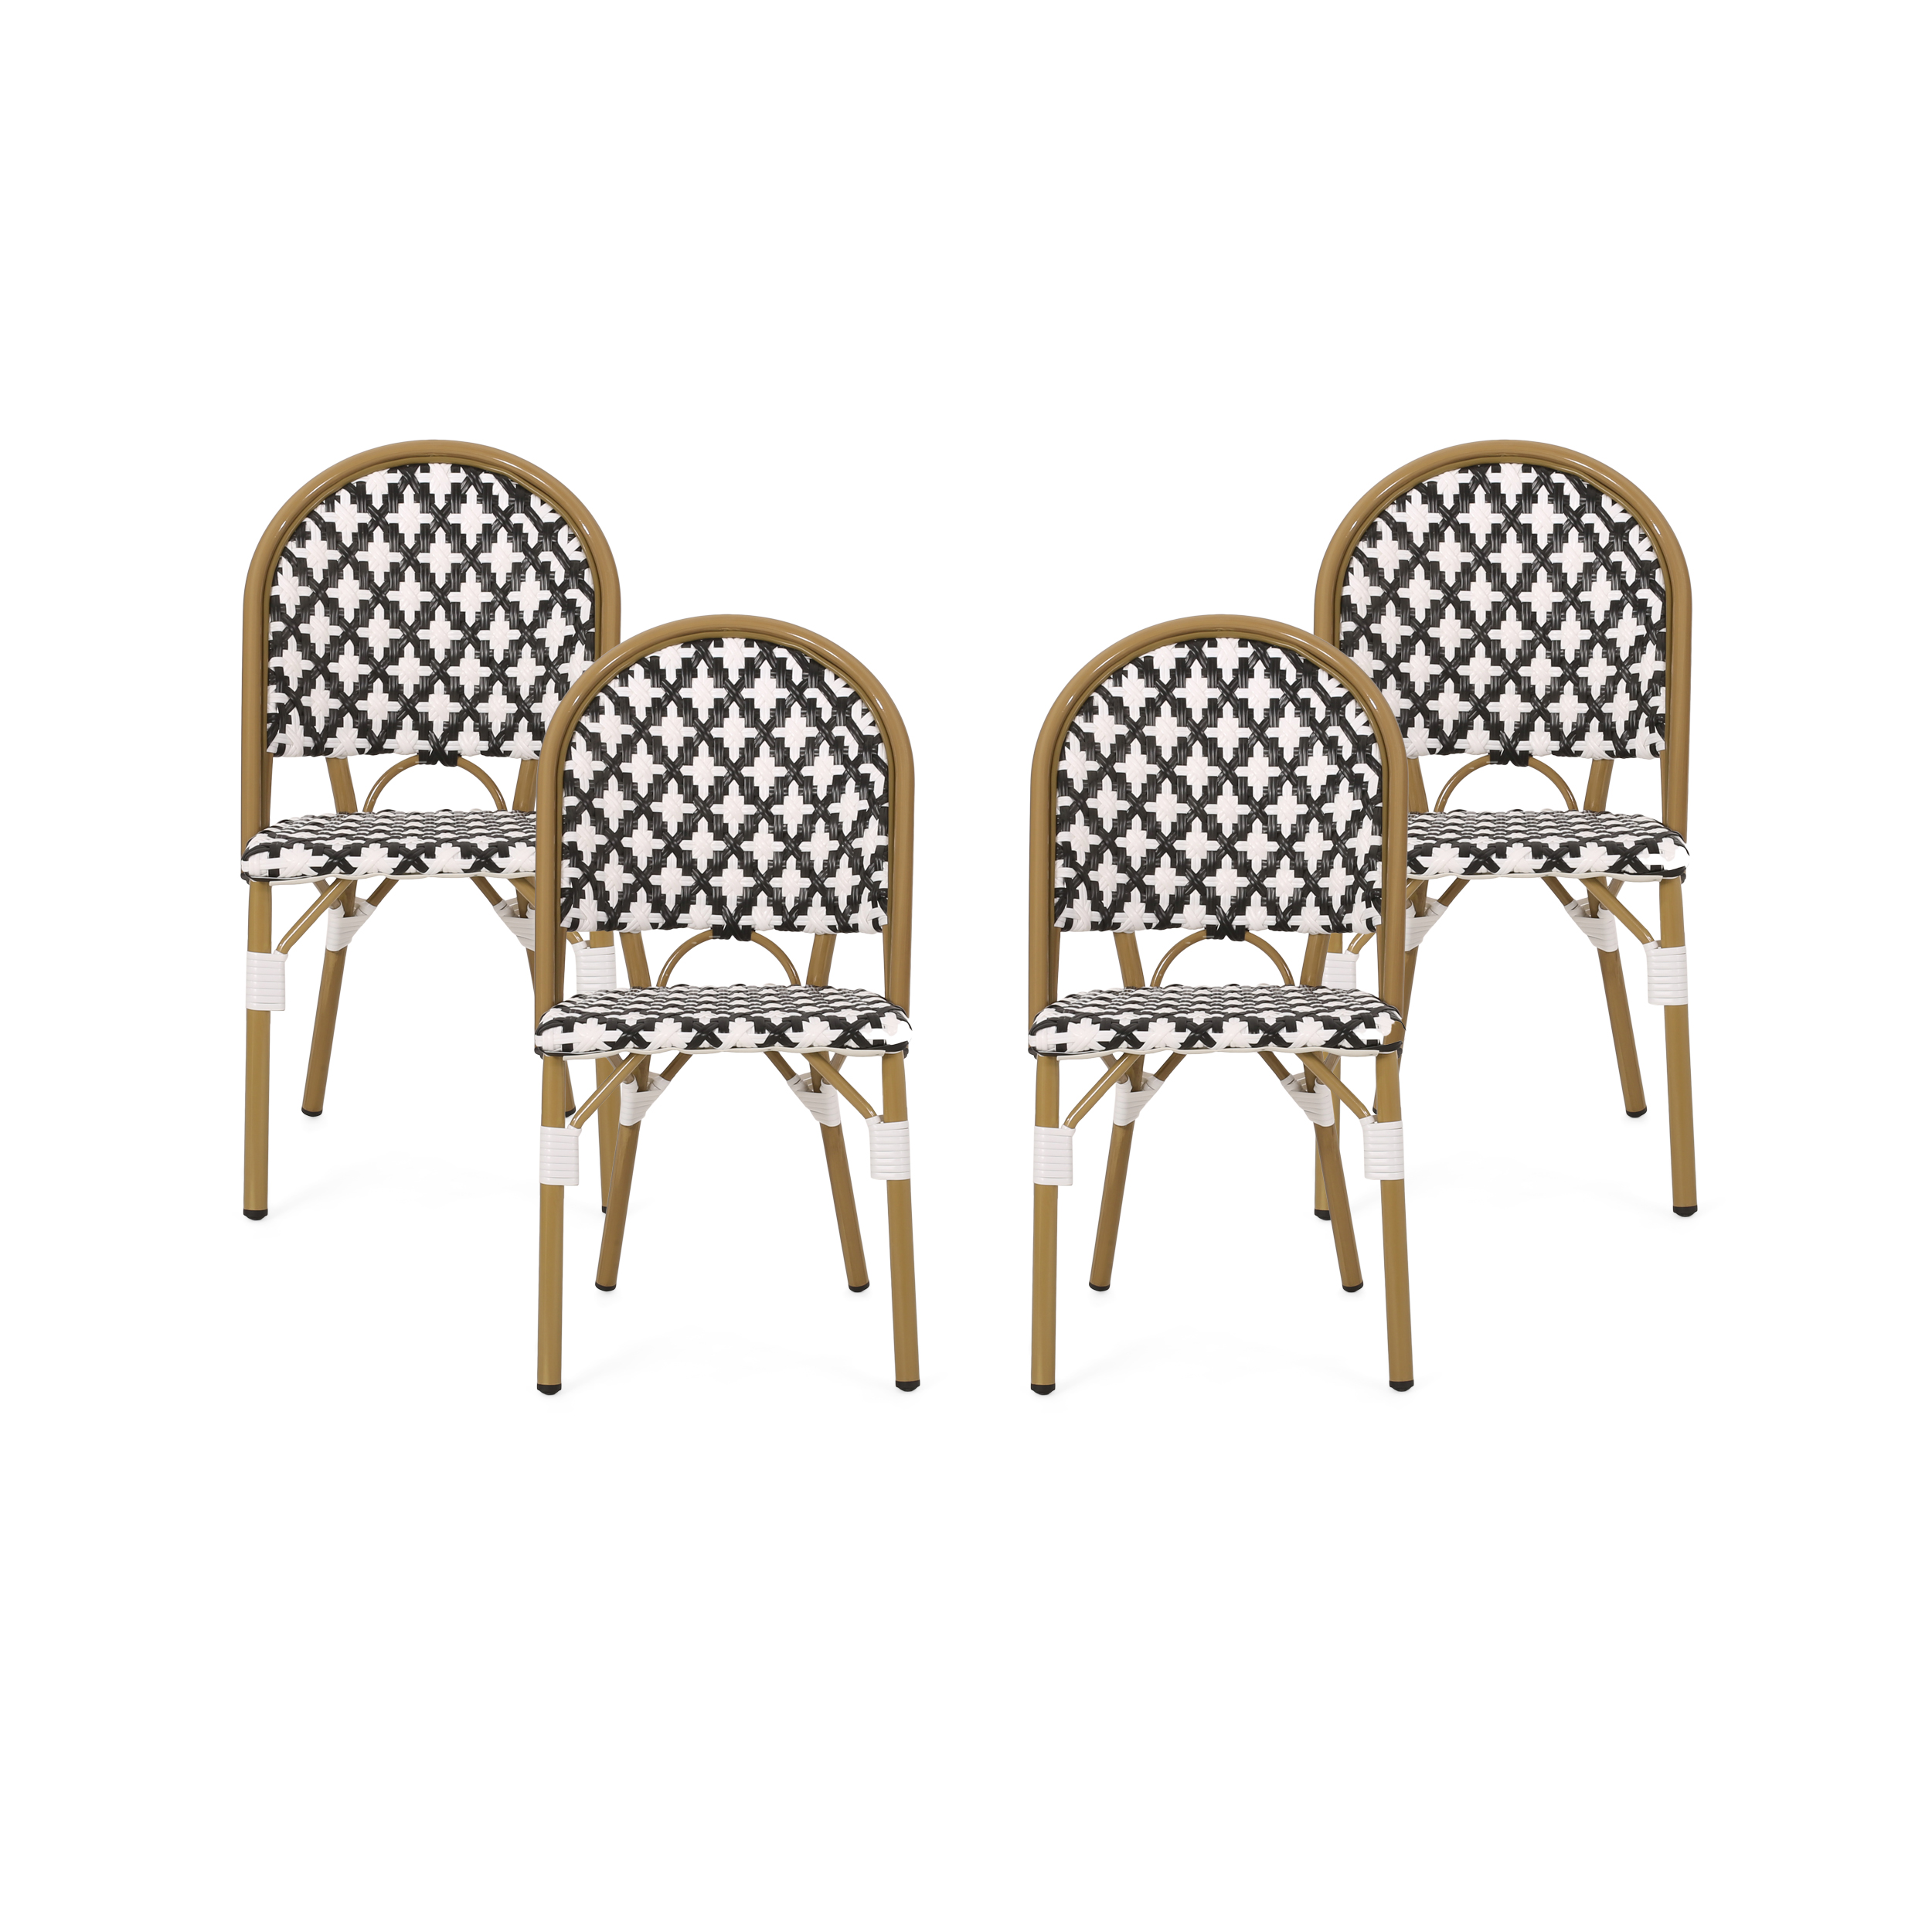 Brandon Outdoor French Bistro Chair, Set of 4, Black, White, Bamboo Finish - image 1 of 8